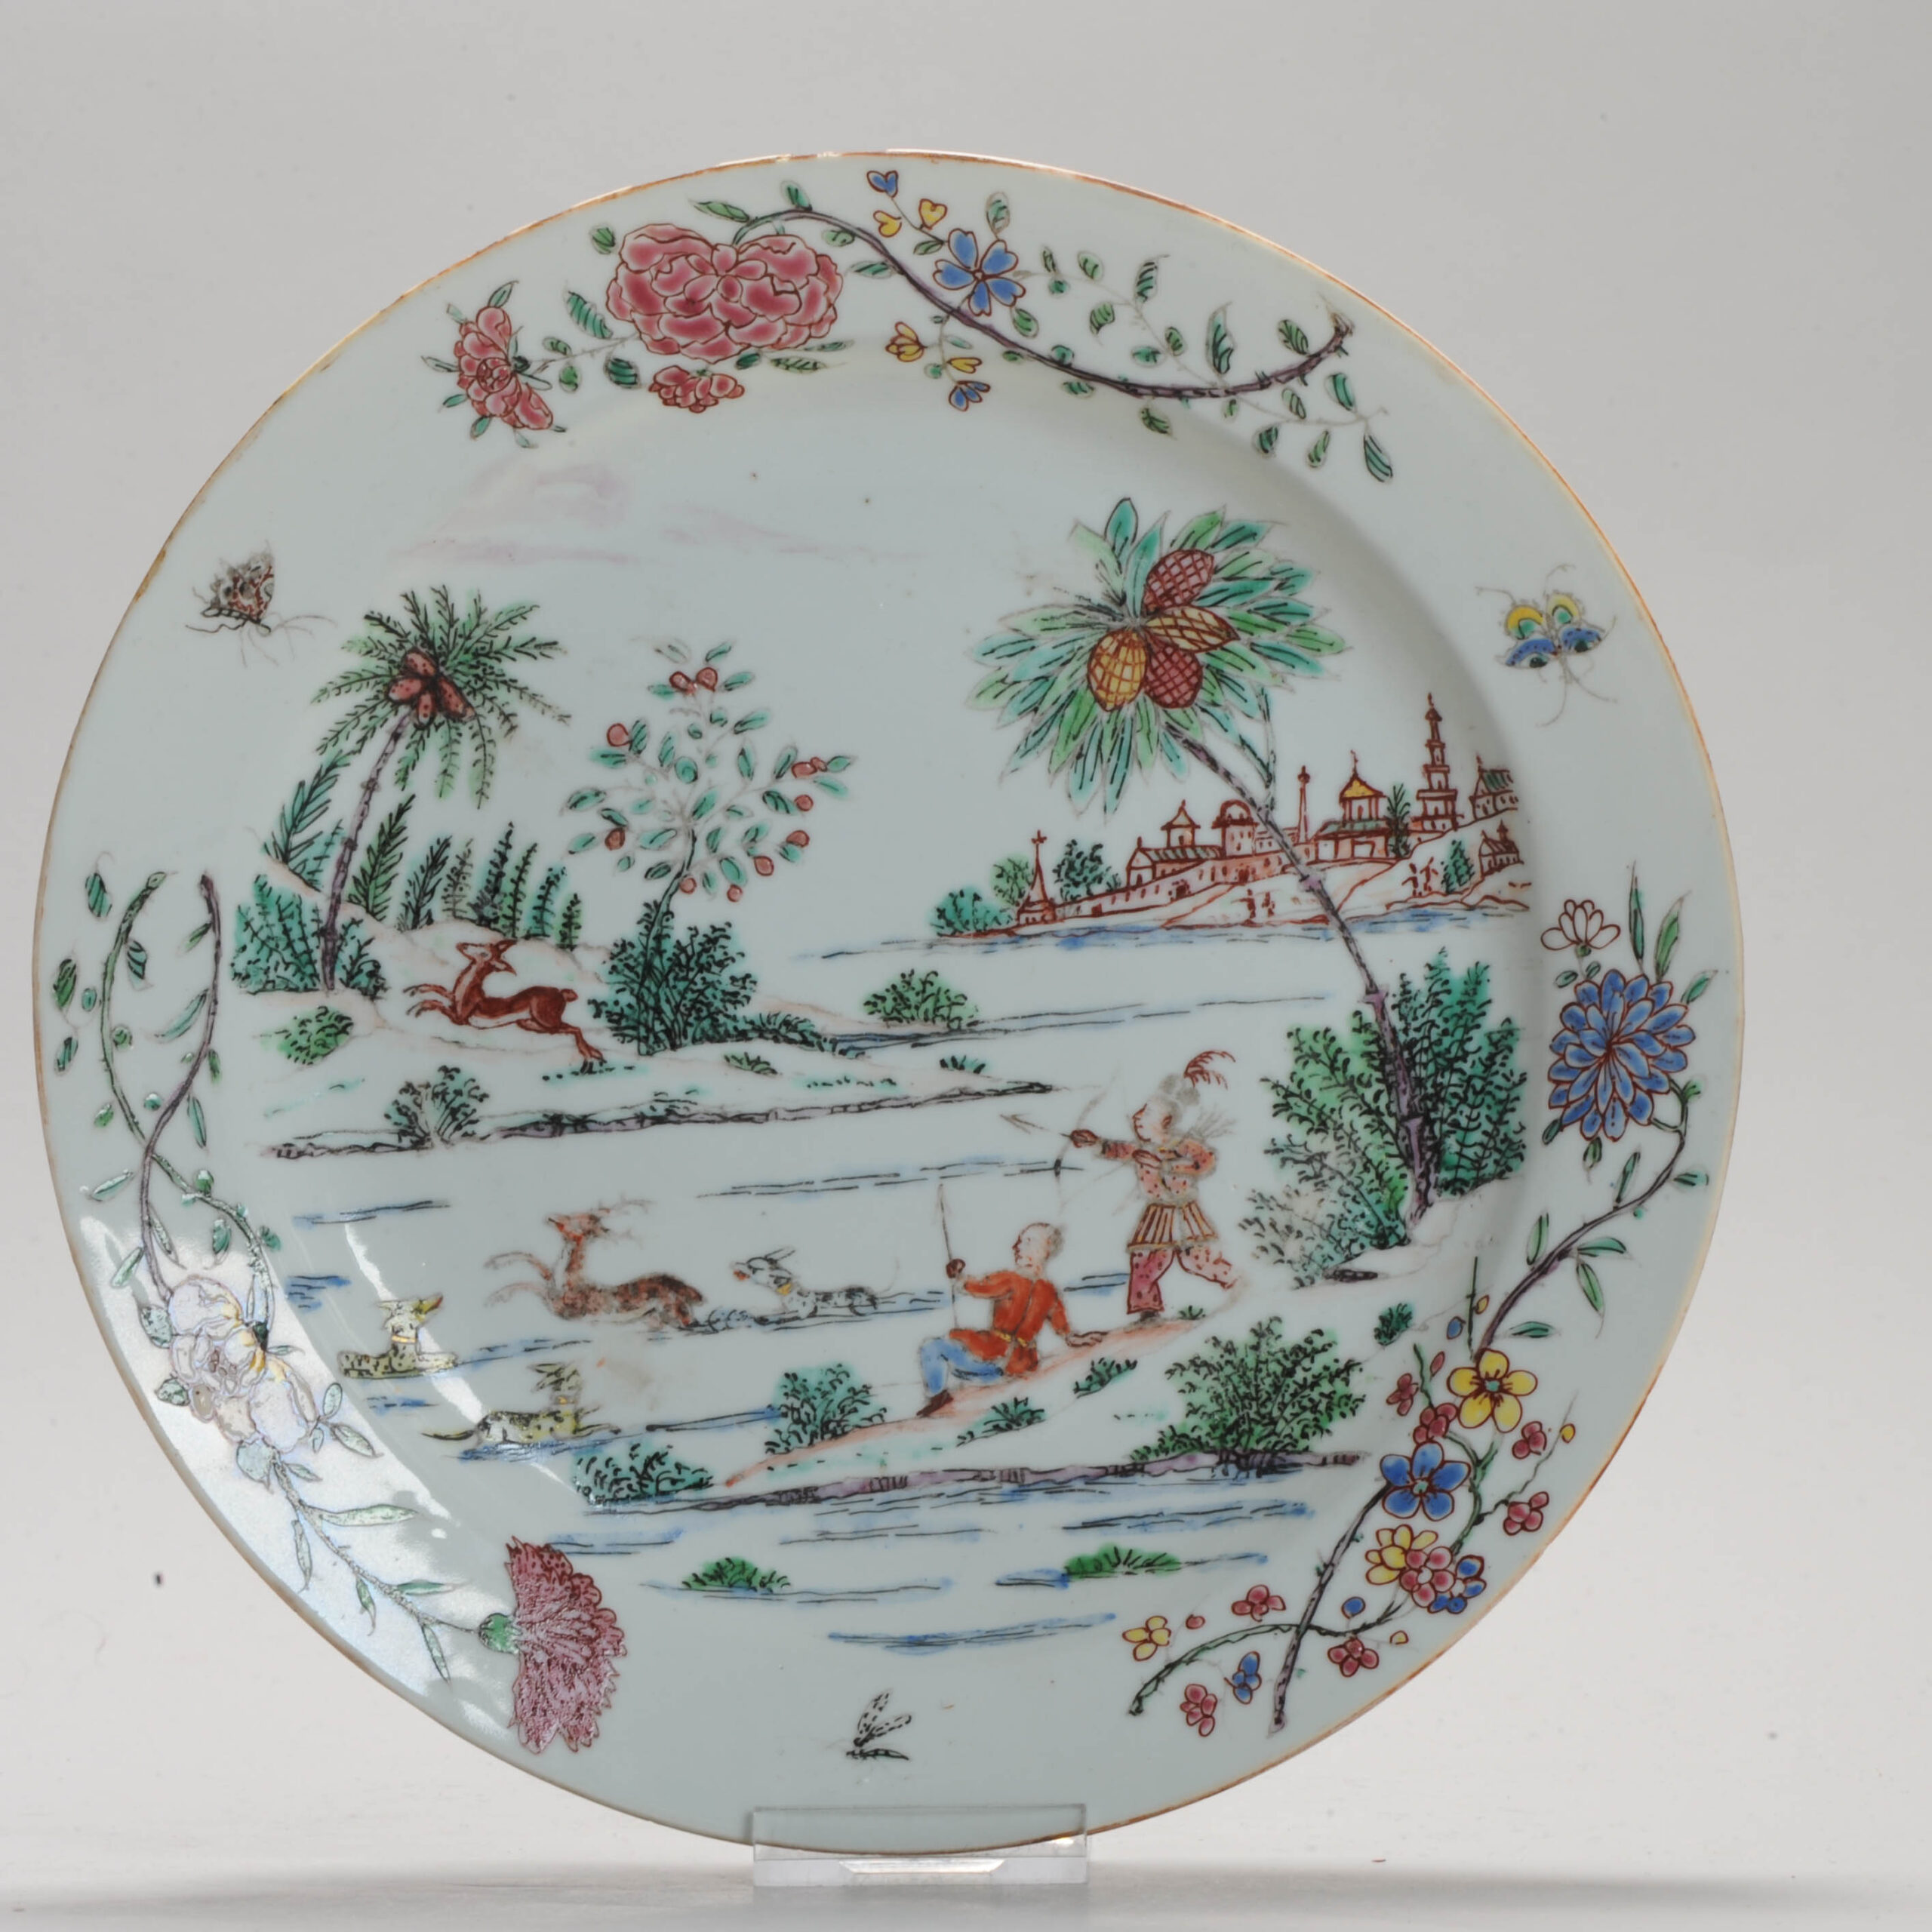 1157 Antique Chinese porcelain Stag Hunt Plate with rare Amsterdam Bont Decoration